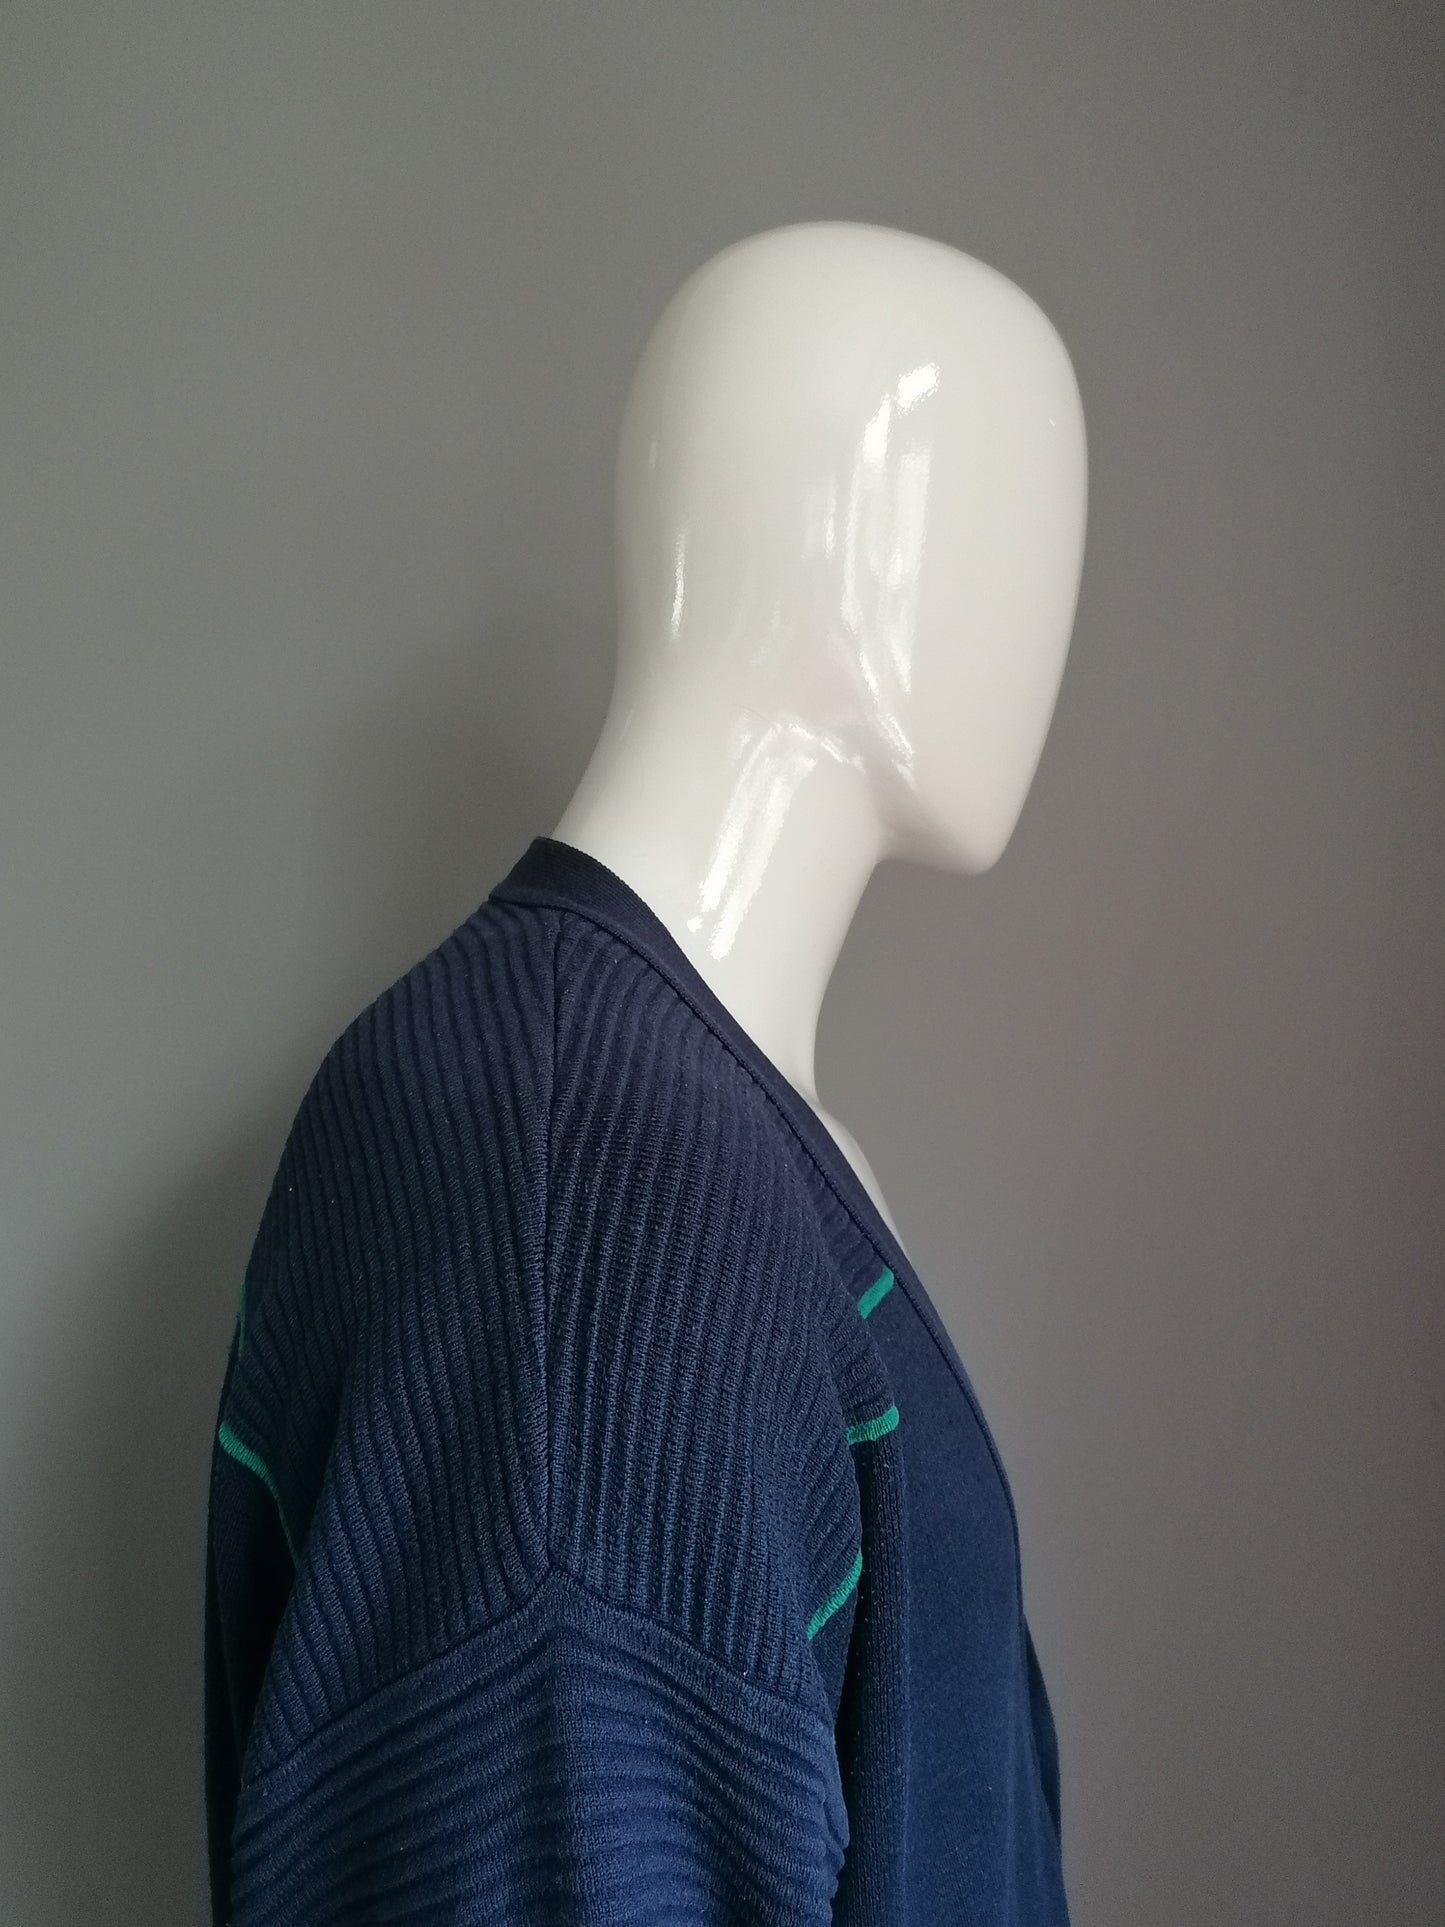 Vintage cardigan with buttons. Dark blue colored. Size XXXL / 3XL